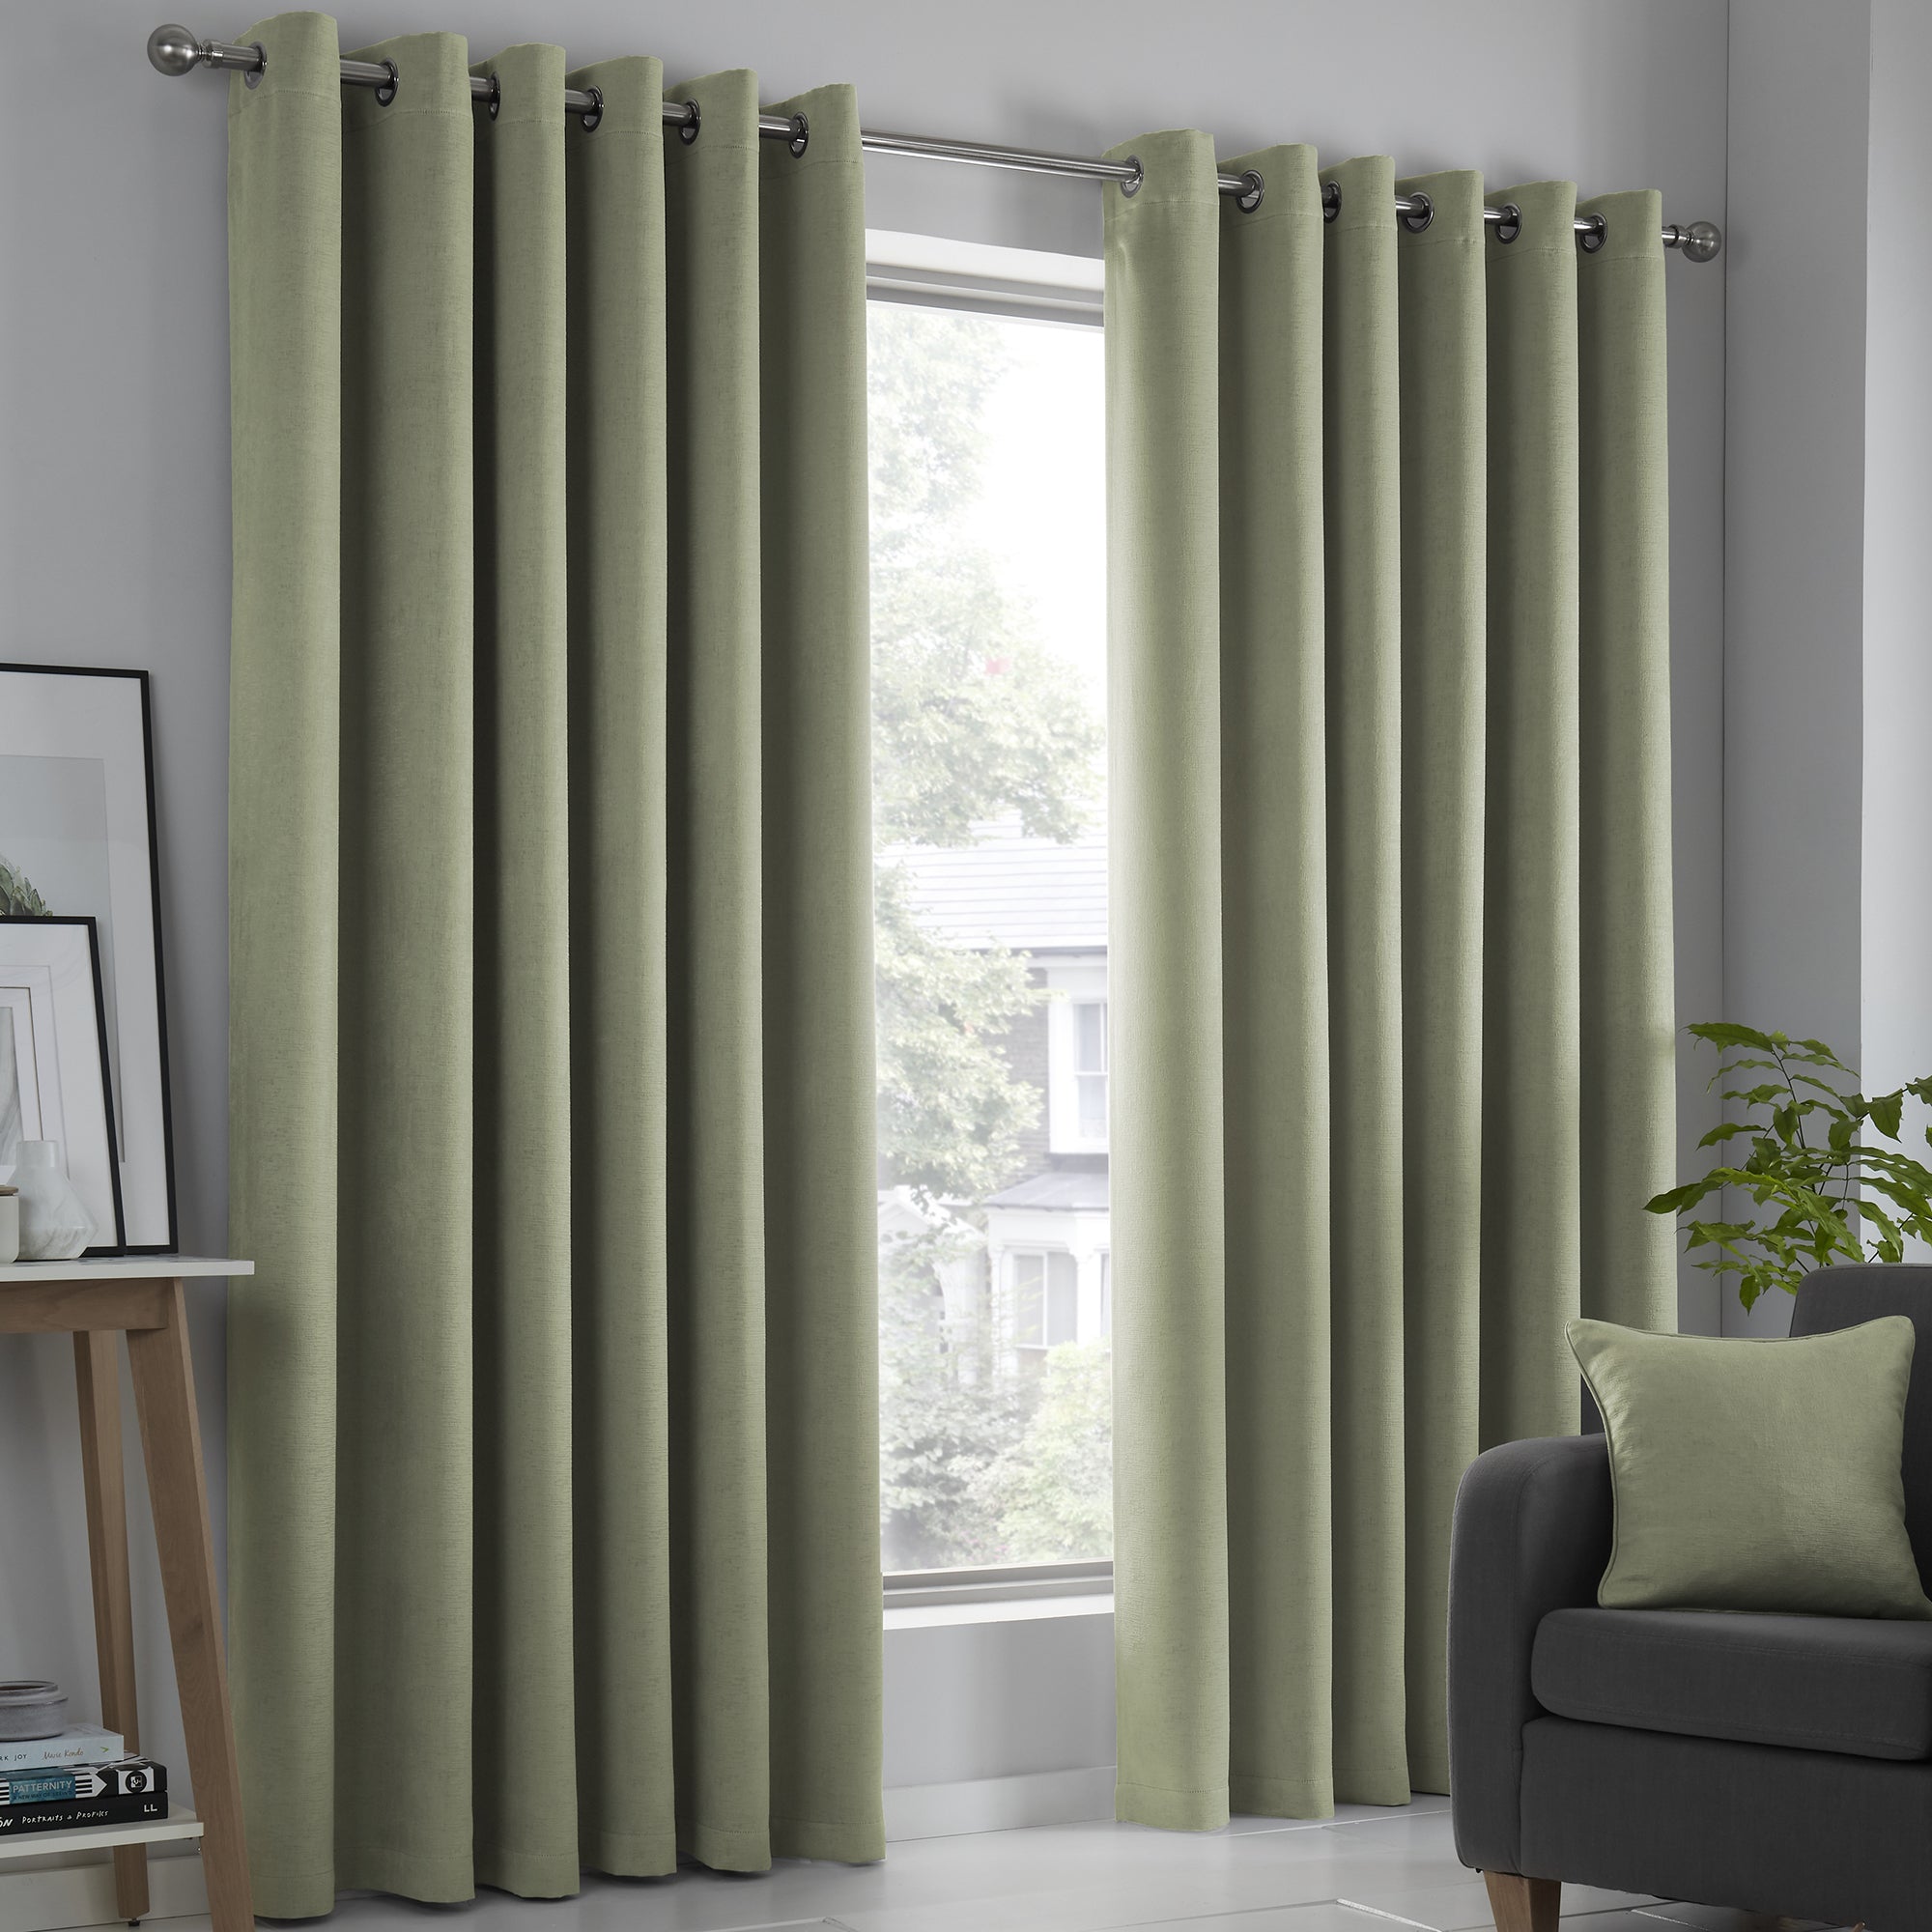 Strata - Blockout Pair of Eyelet Curtains in Green - by Fusion